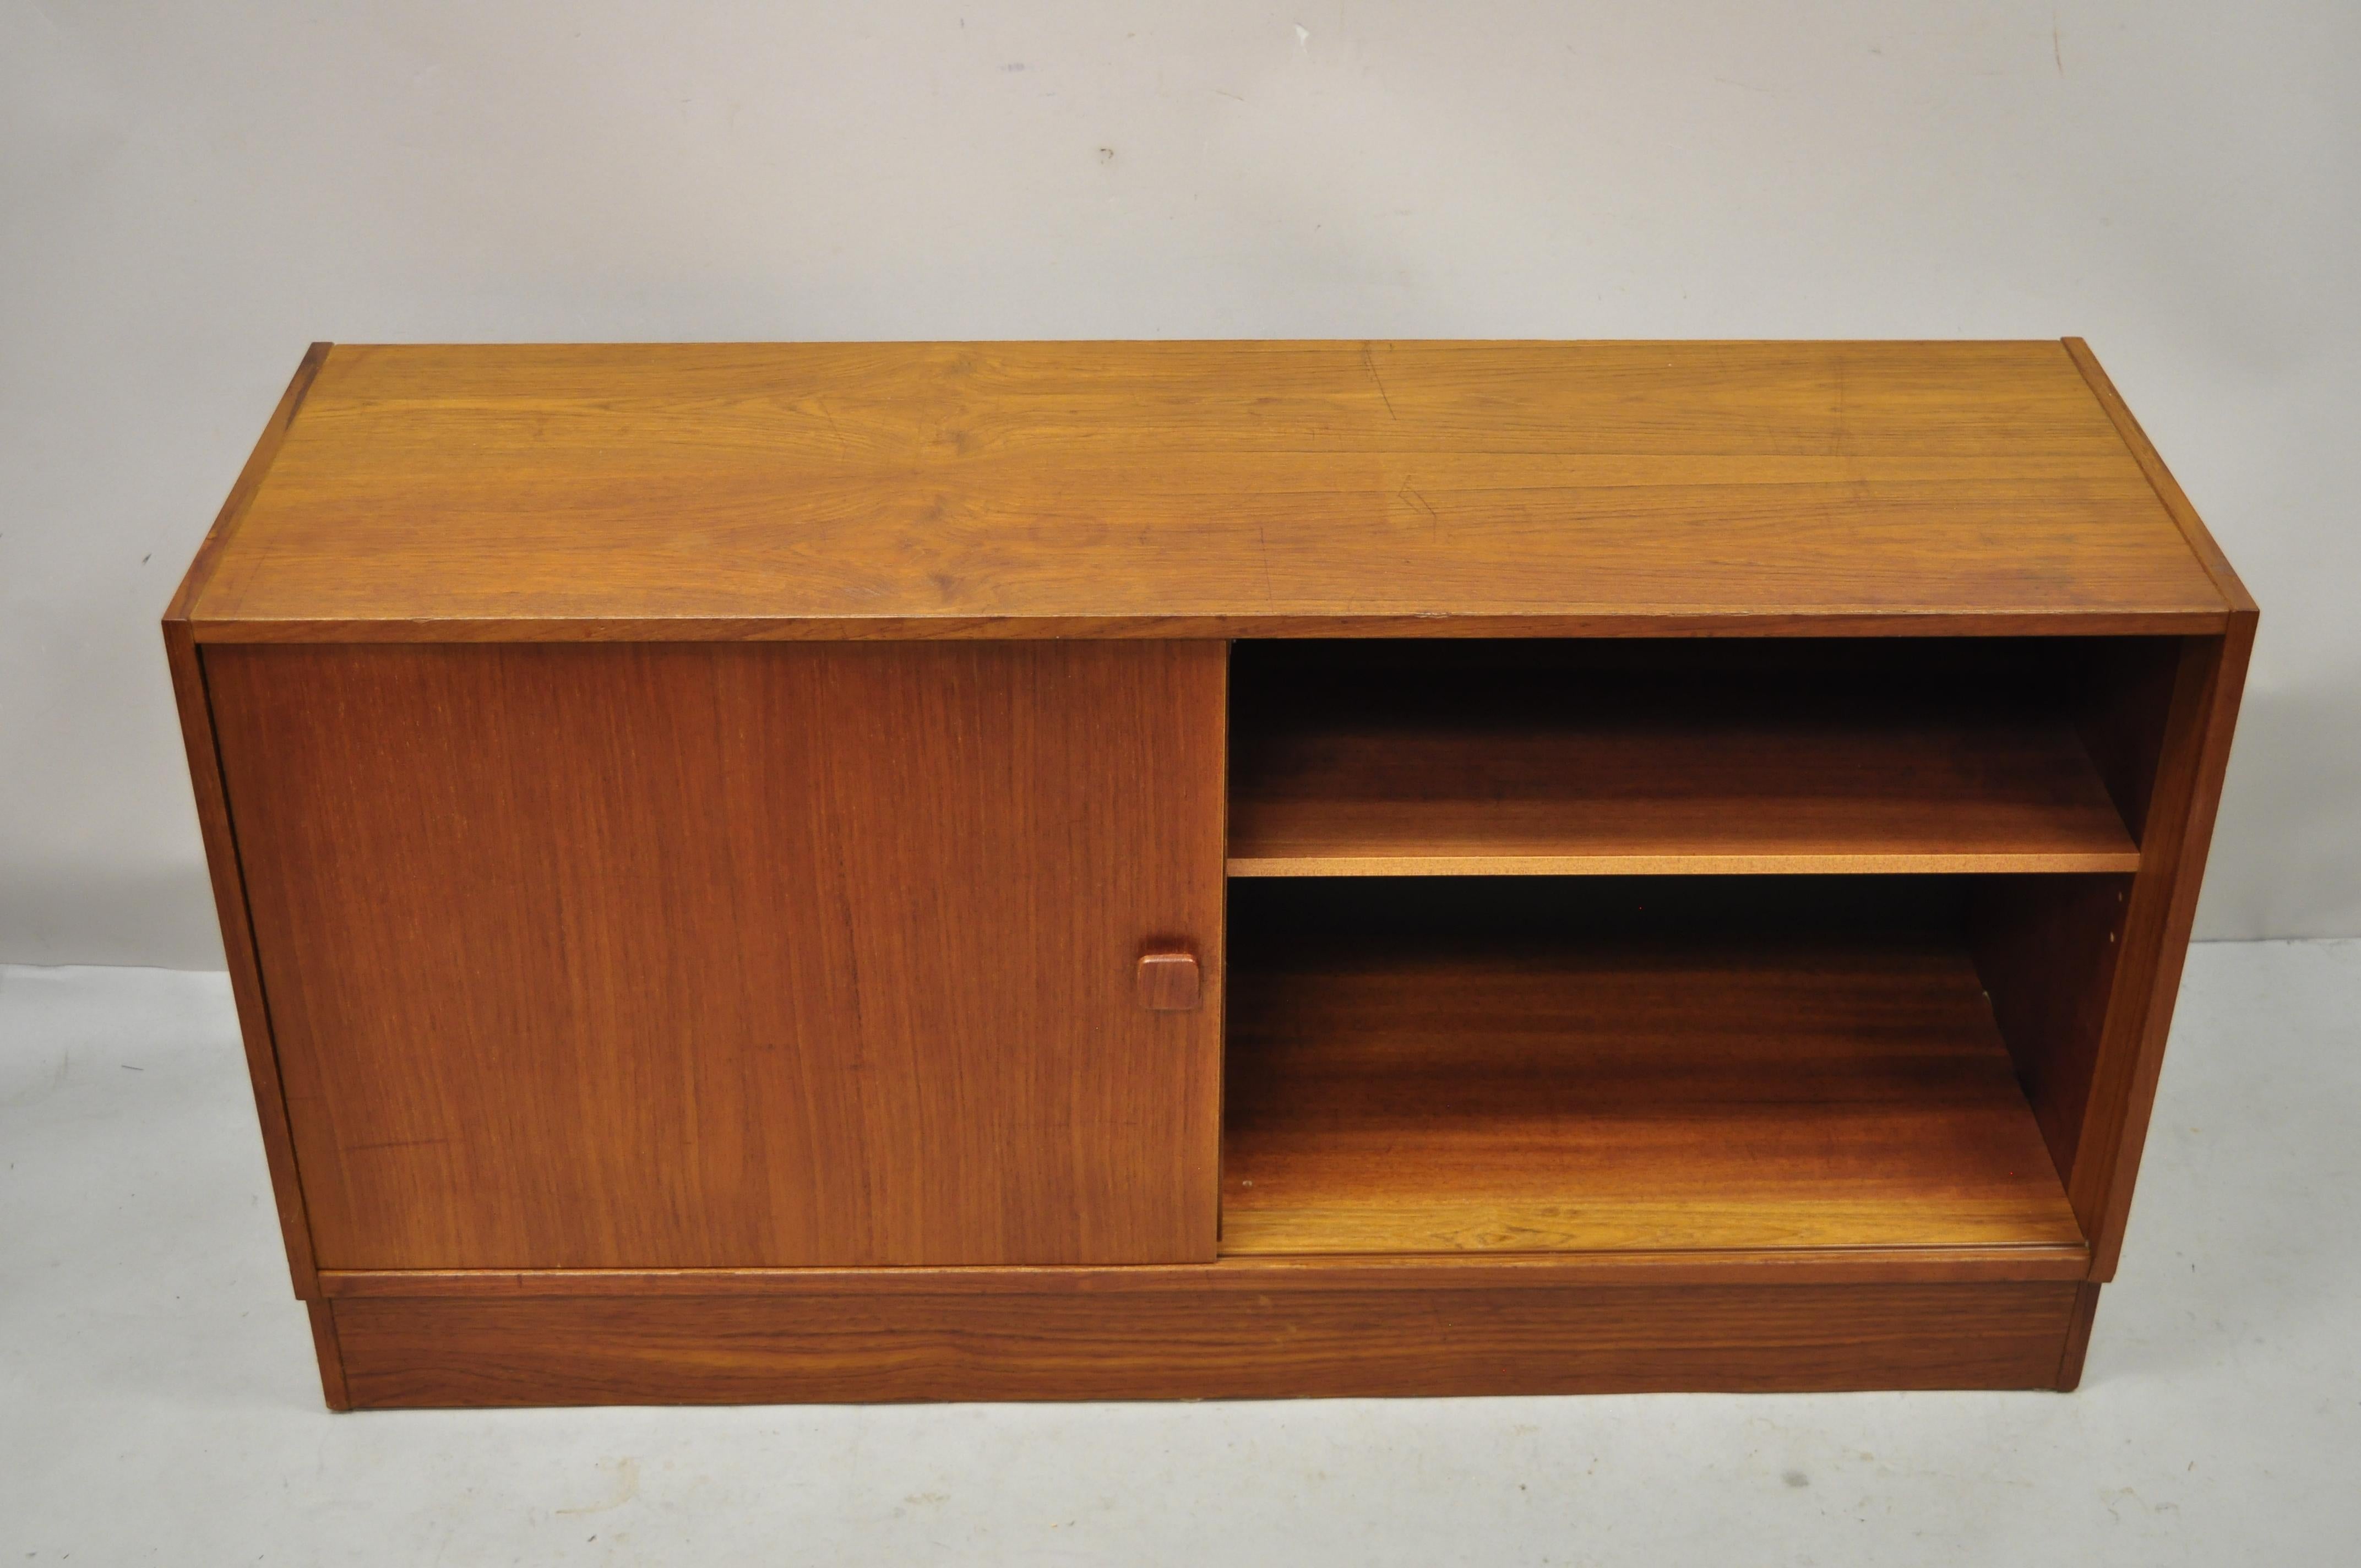 Domino Mobler Mid Century Danish Modern teak wood small credenza cabinet. Item features sliding door, beautiful wood grain, original label, 4 dovetailed drawers, clean modernist lines, great style and form. Circa mid 20th century. Measurements: 25